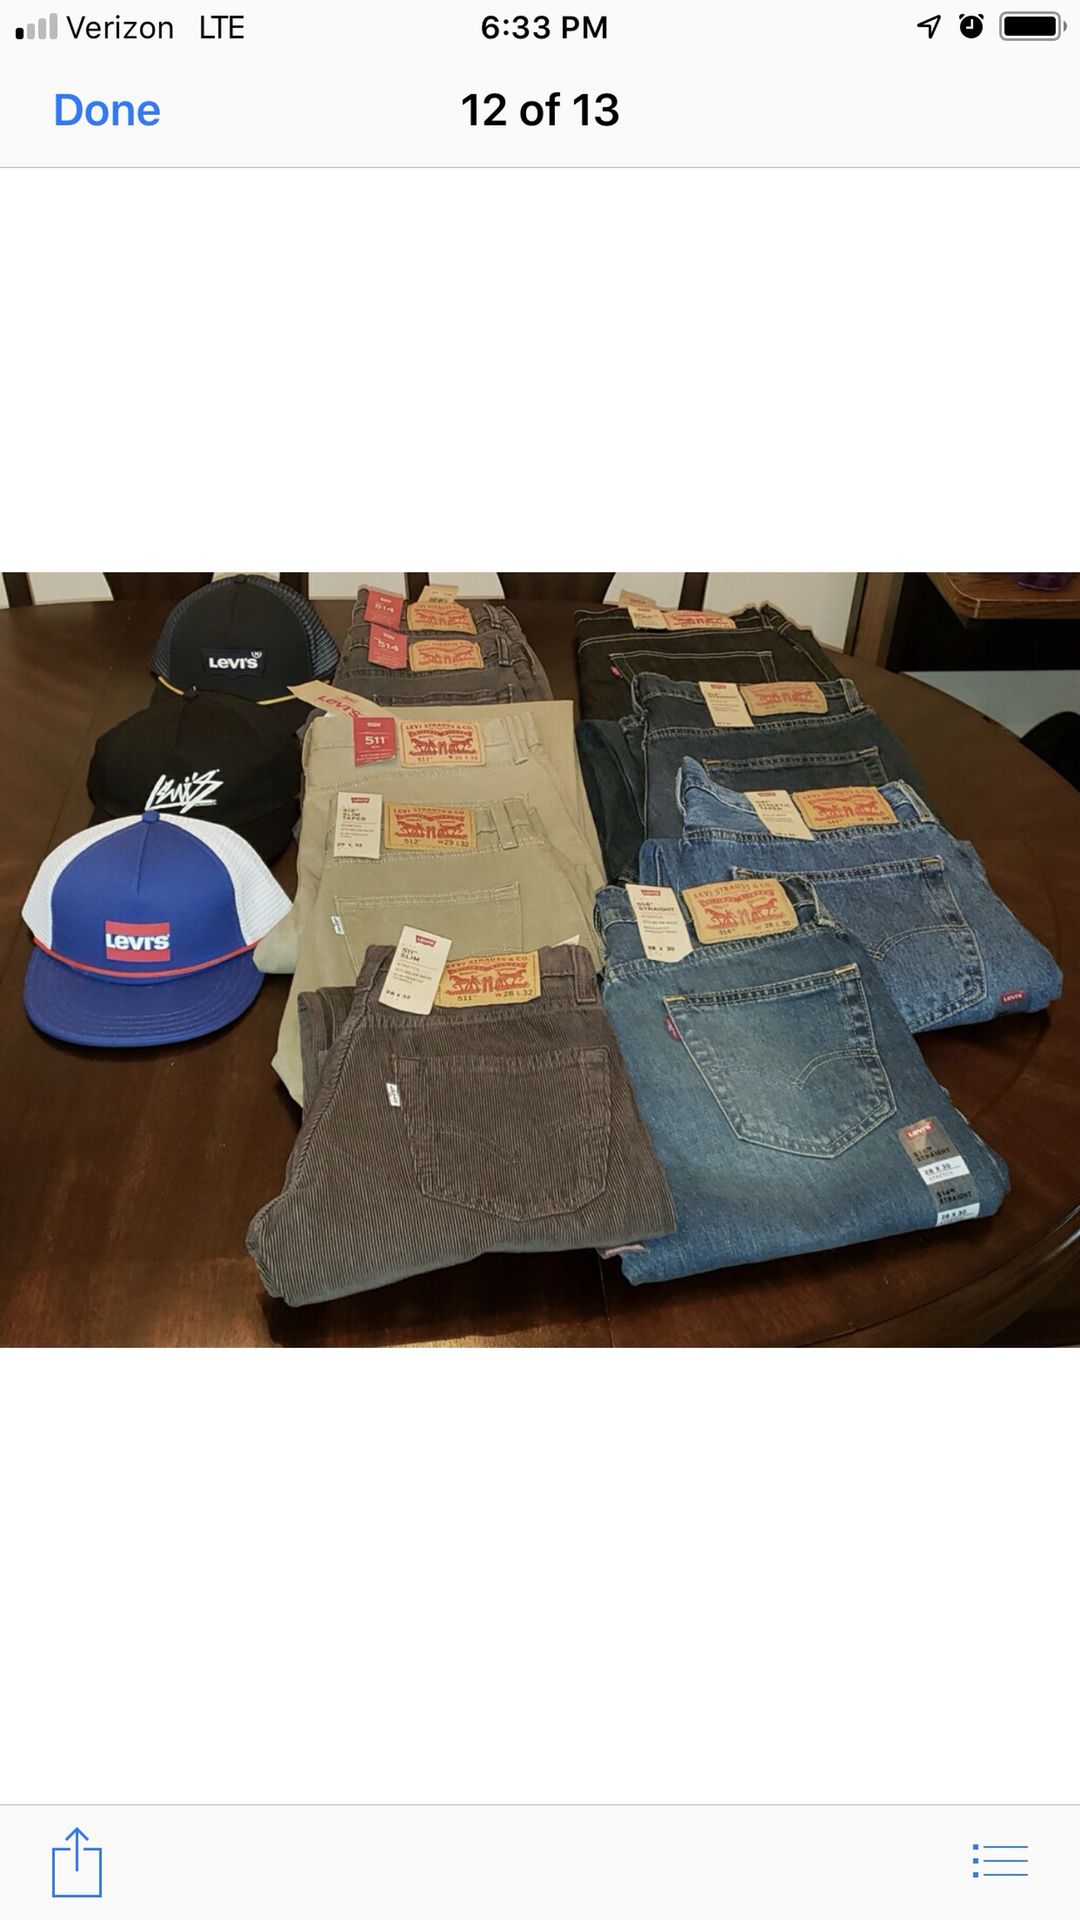 Levi’s jeans several different colors and styles and also truckers hats